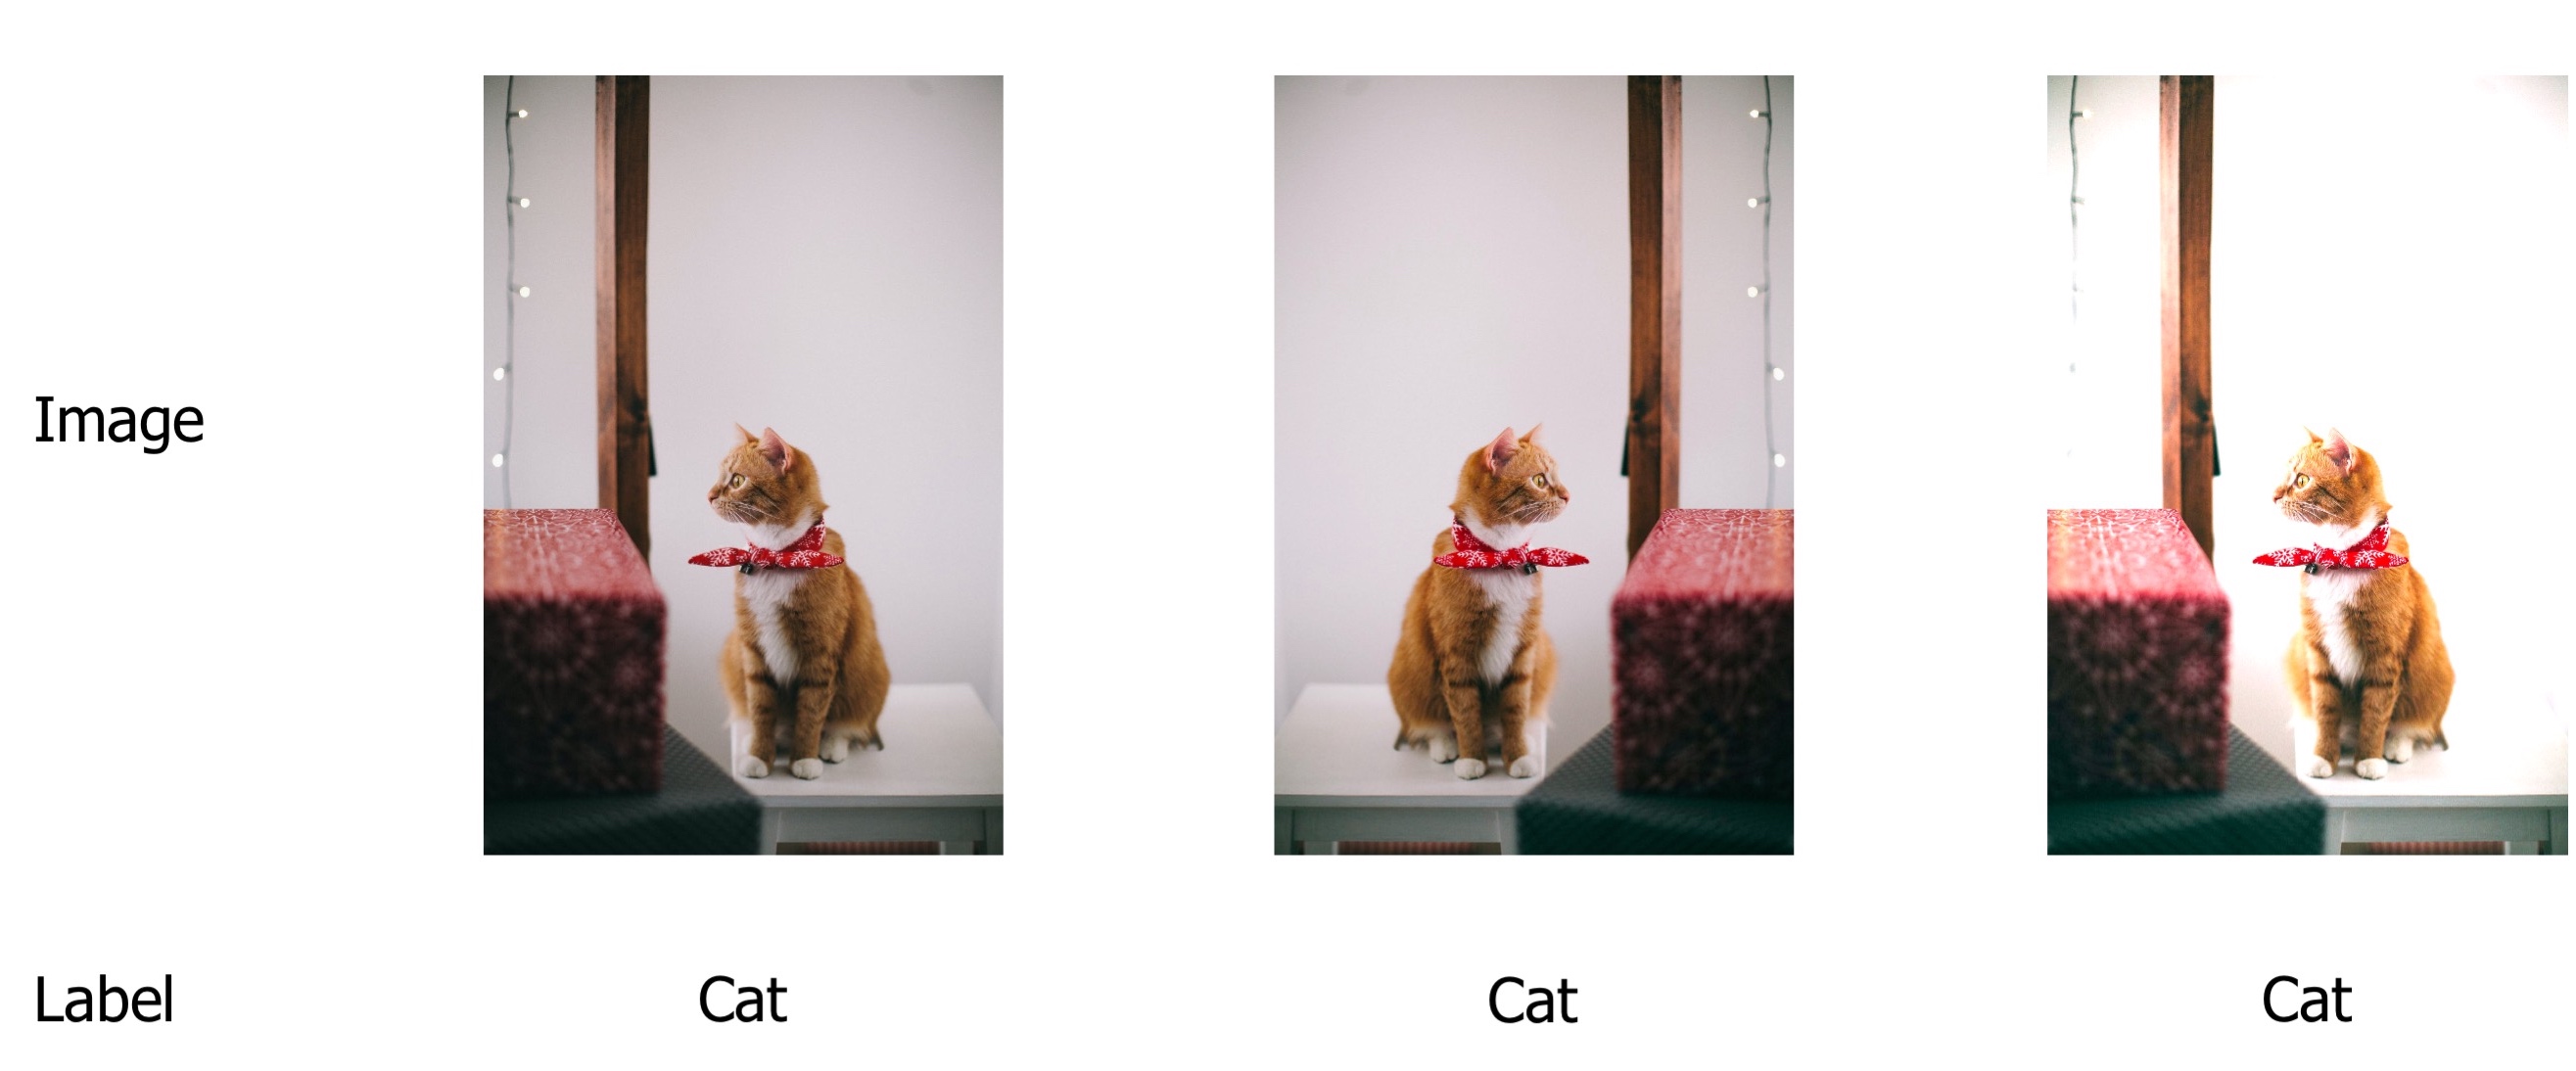 Examples of augmented images and their respective labels for the image classification task